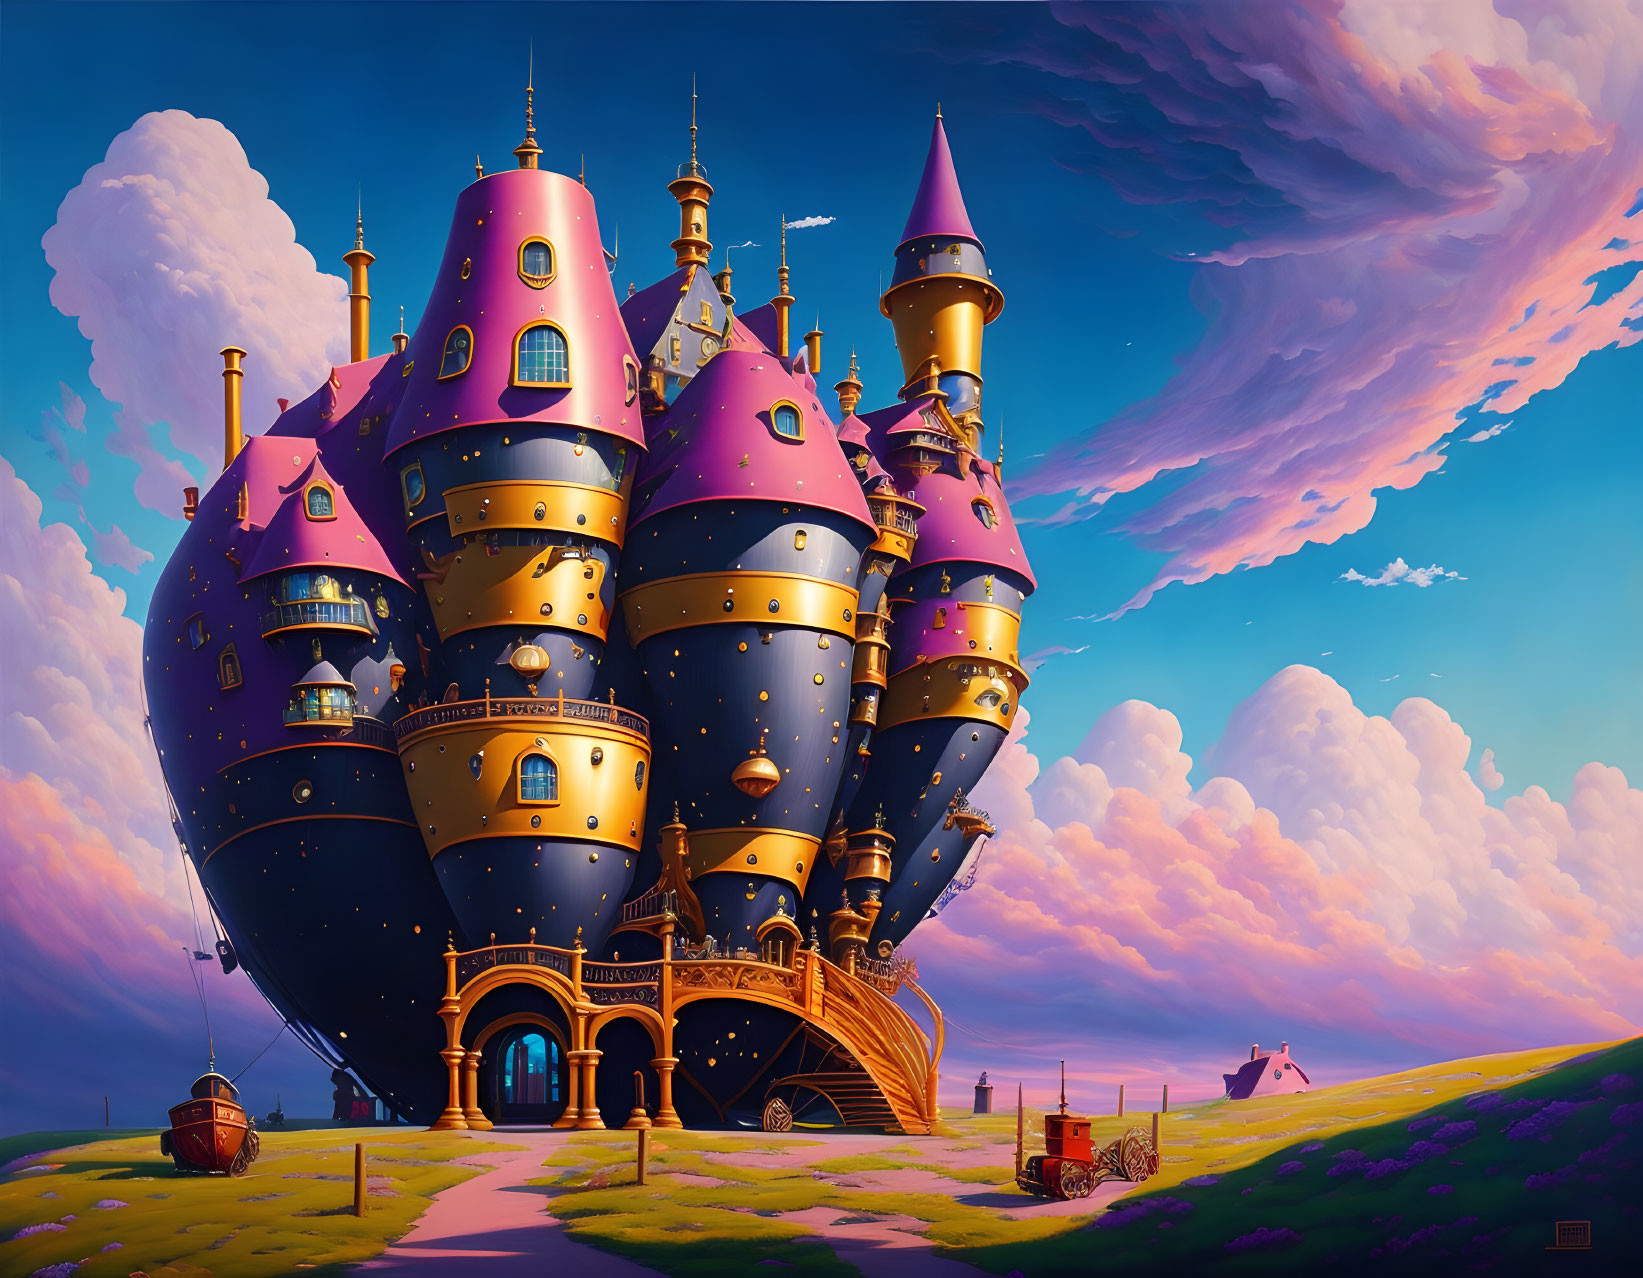 Whimsical castle with purple and gold towers in pastel sky